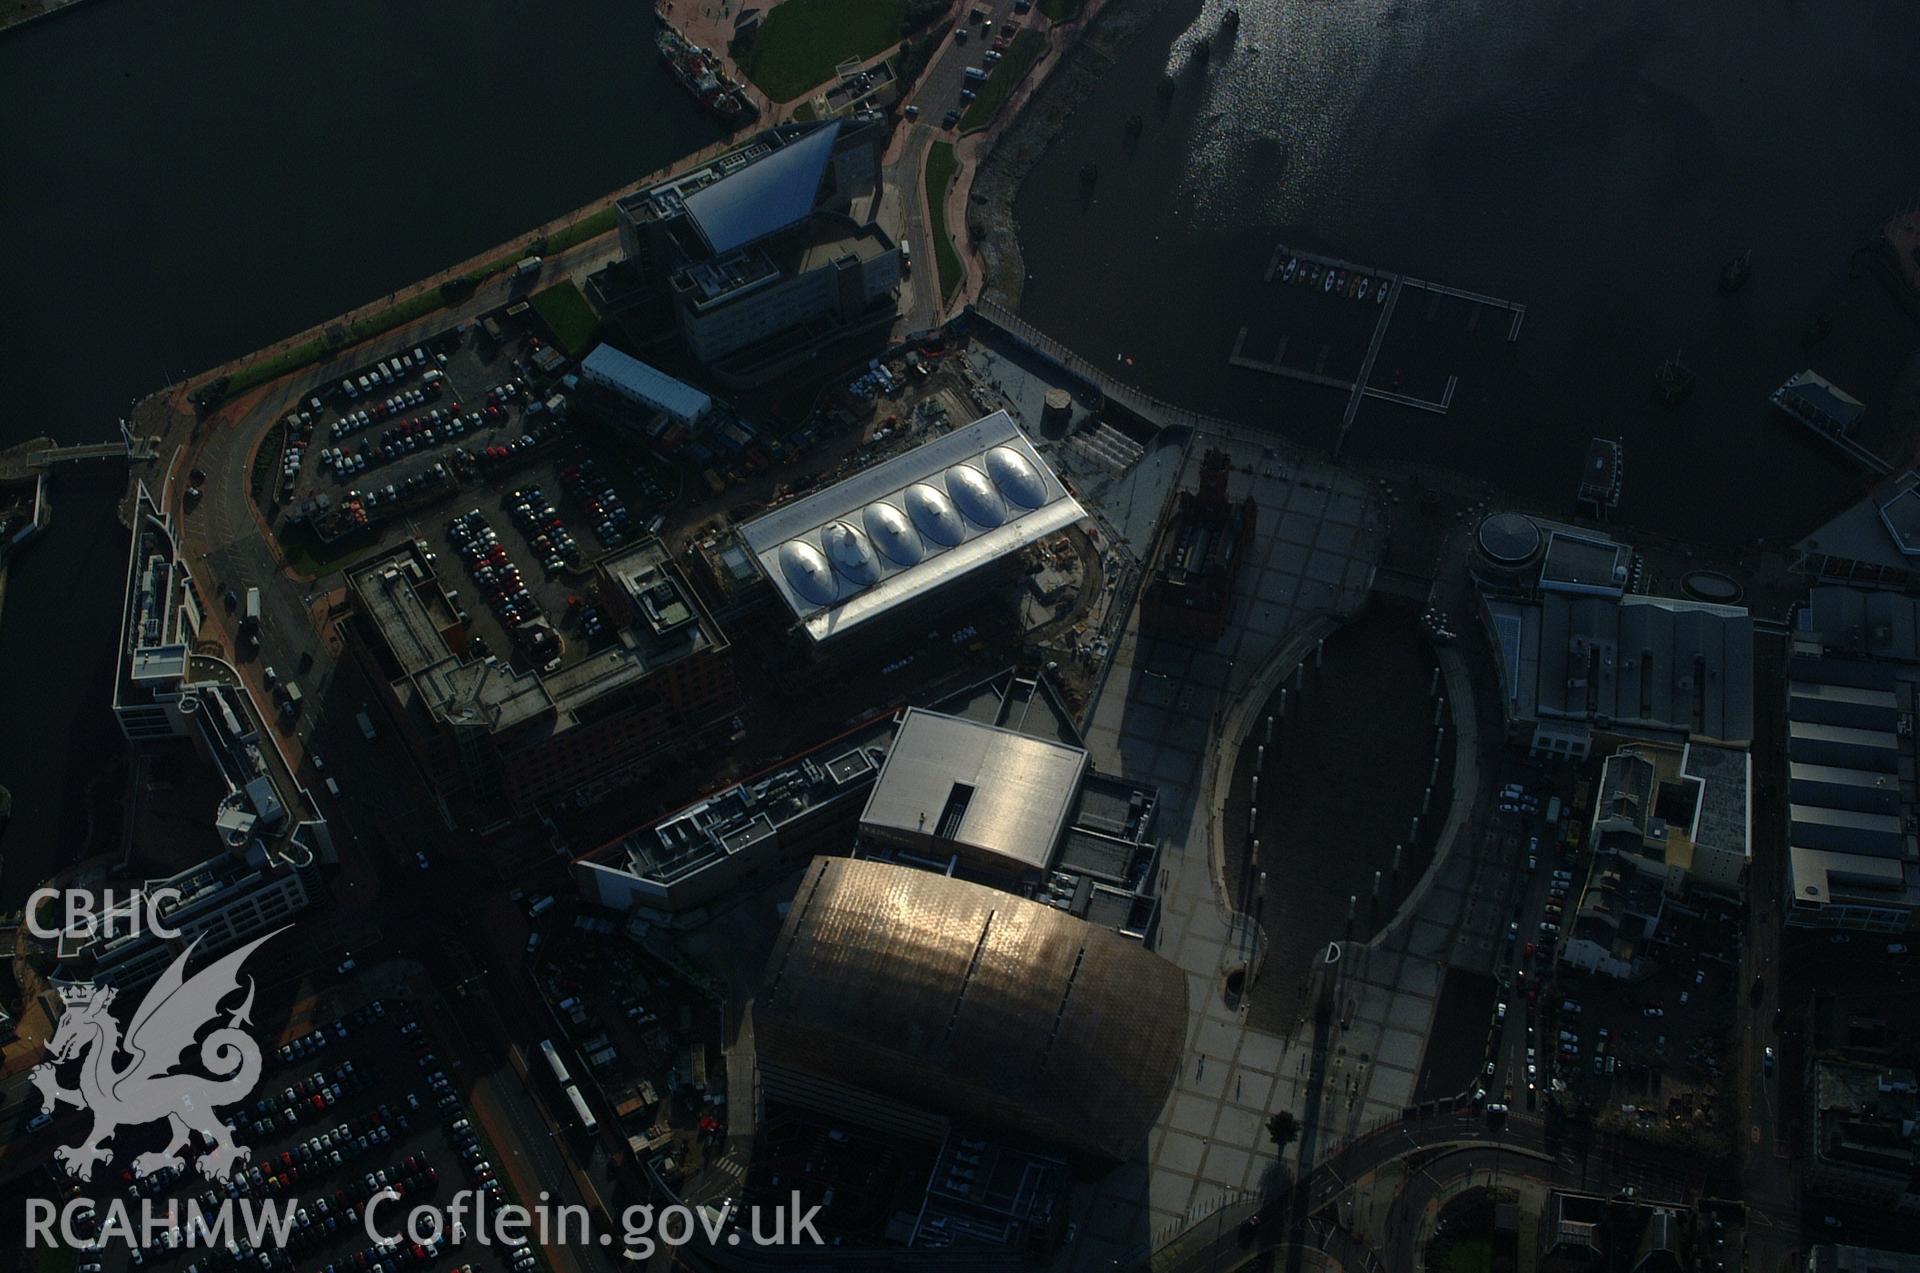 RCAHMW colour oblique aerial photograph of the Senedd, Cardiff Bay taken on 13/01/2005 by Toby Driver